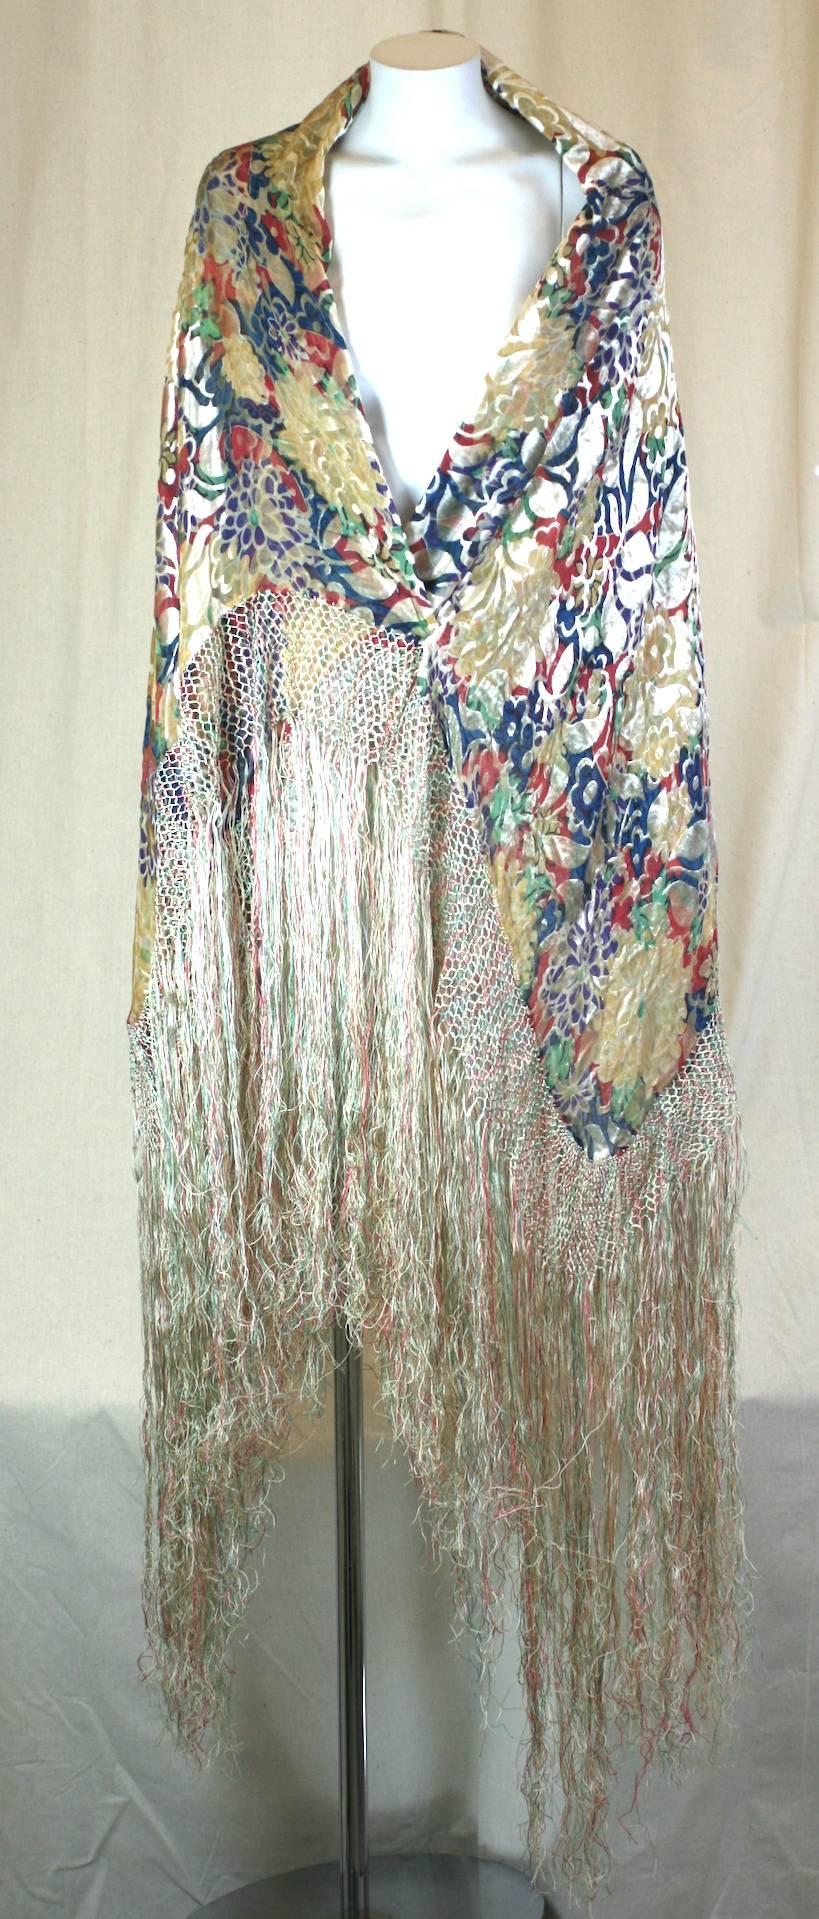 Rare, Art Deco Liberty of London printed silk chiffon souffle and devore cut velvet  shawl from the early 20th century. 
This vari colored muted shawl features Liberty and Co's classic printed chiffon souffle ground, reinterpreted for the Art Deco